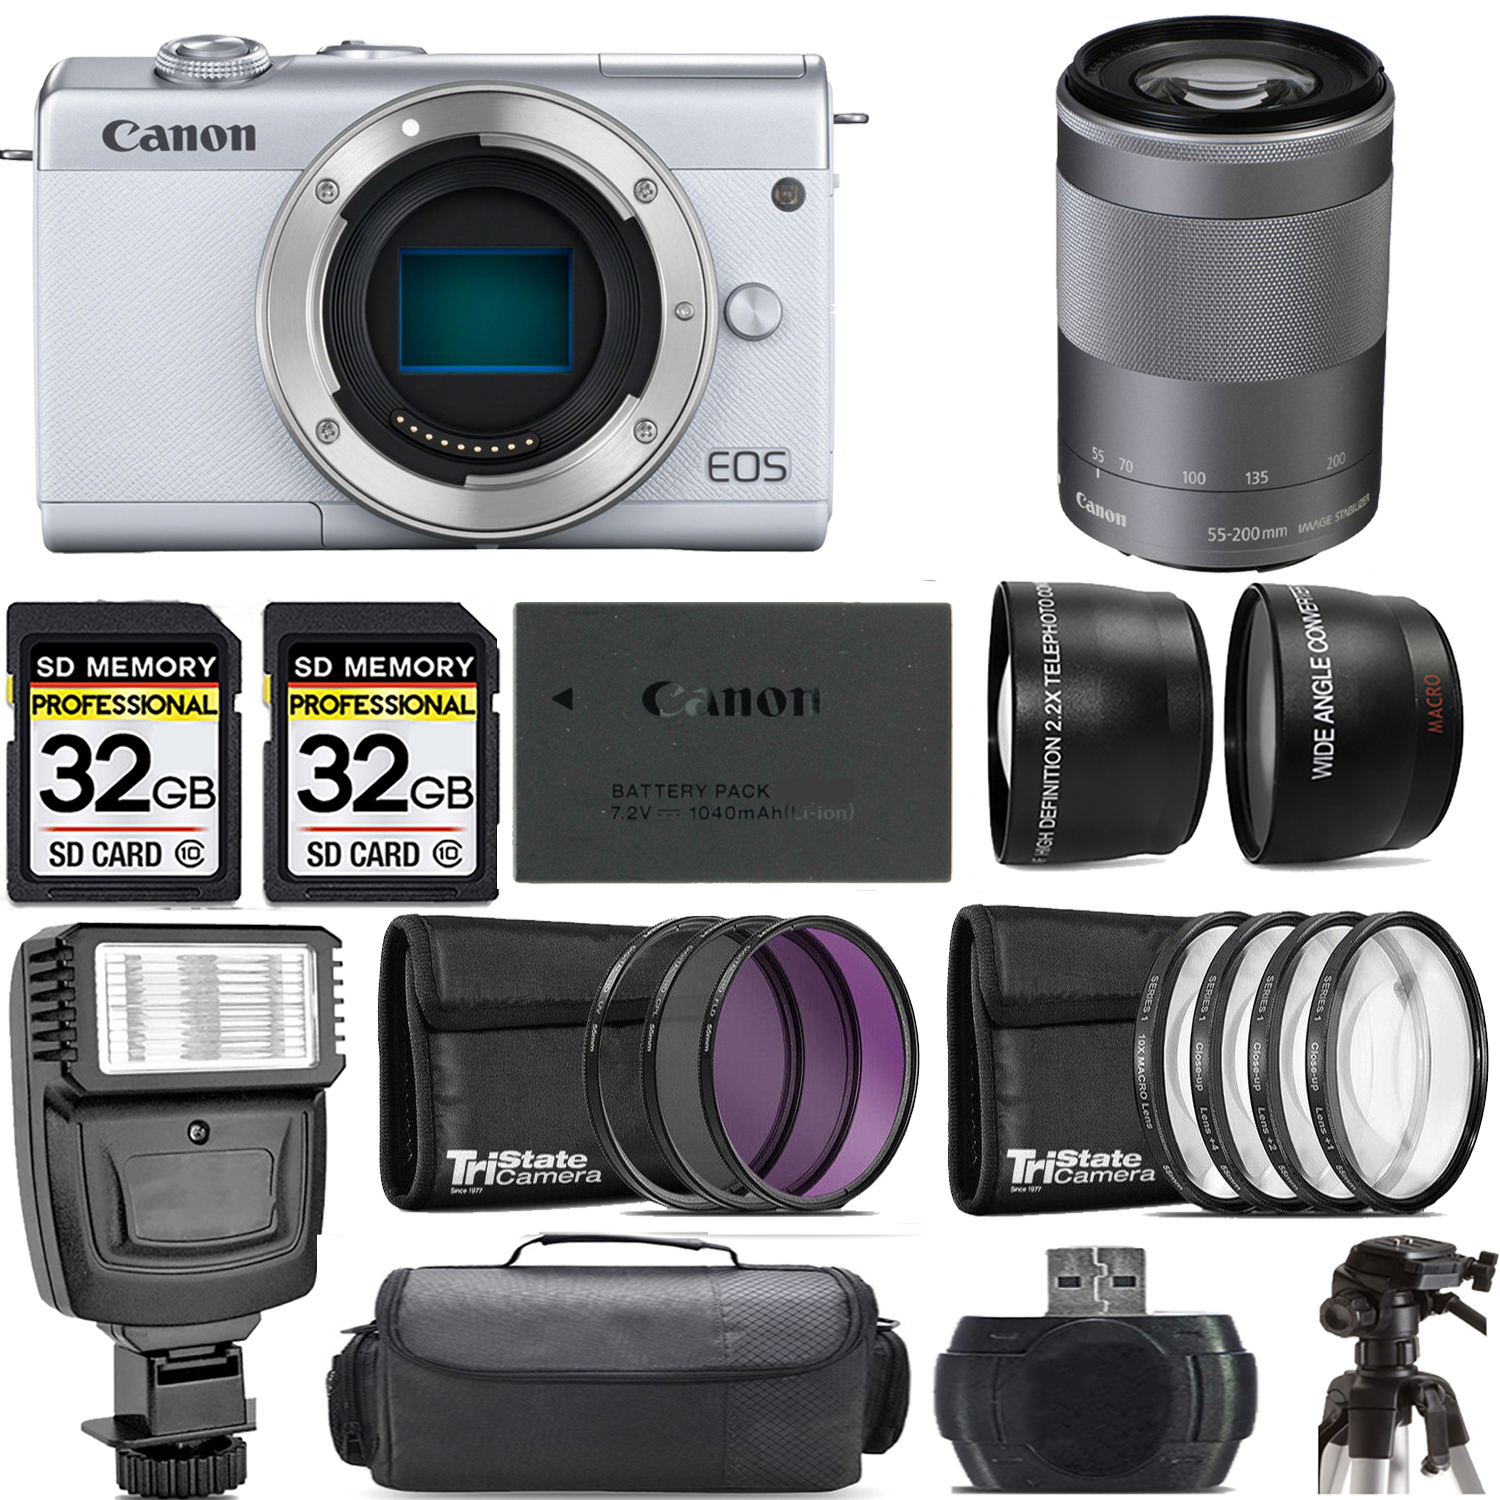 EOS M200  Camera (White) + 55-200mm f/4.5-6.3 IS STM Lens (Silver) + Flash - Kit *FREE SHIPPING*